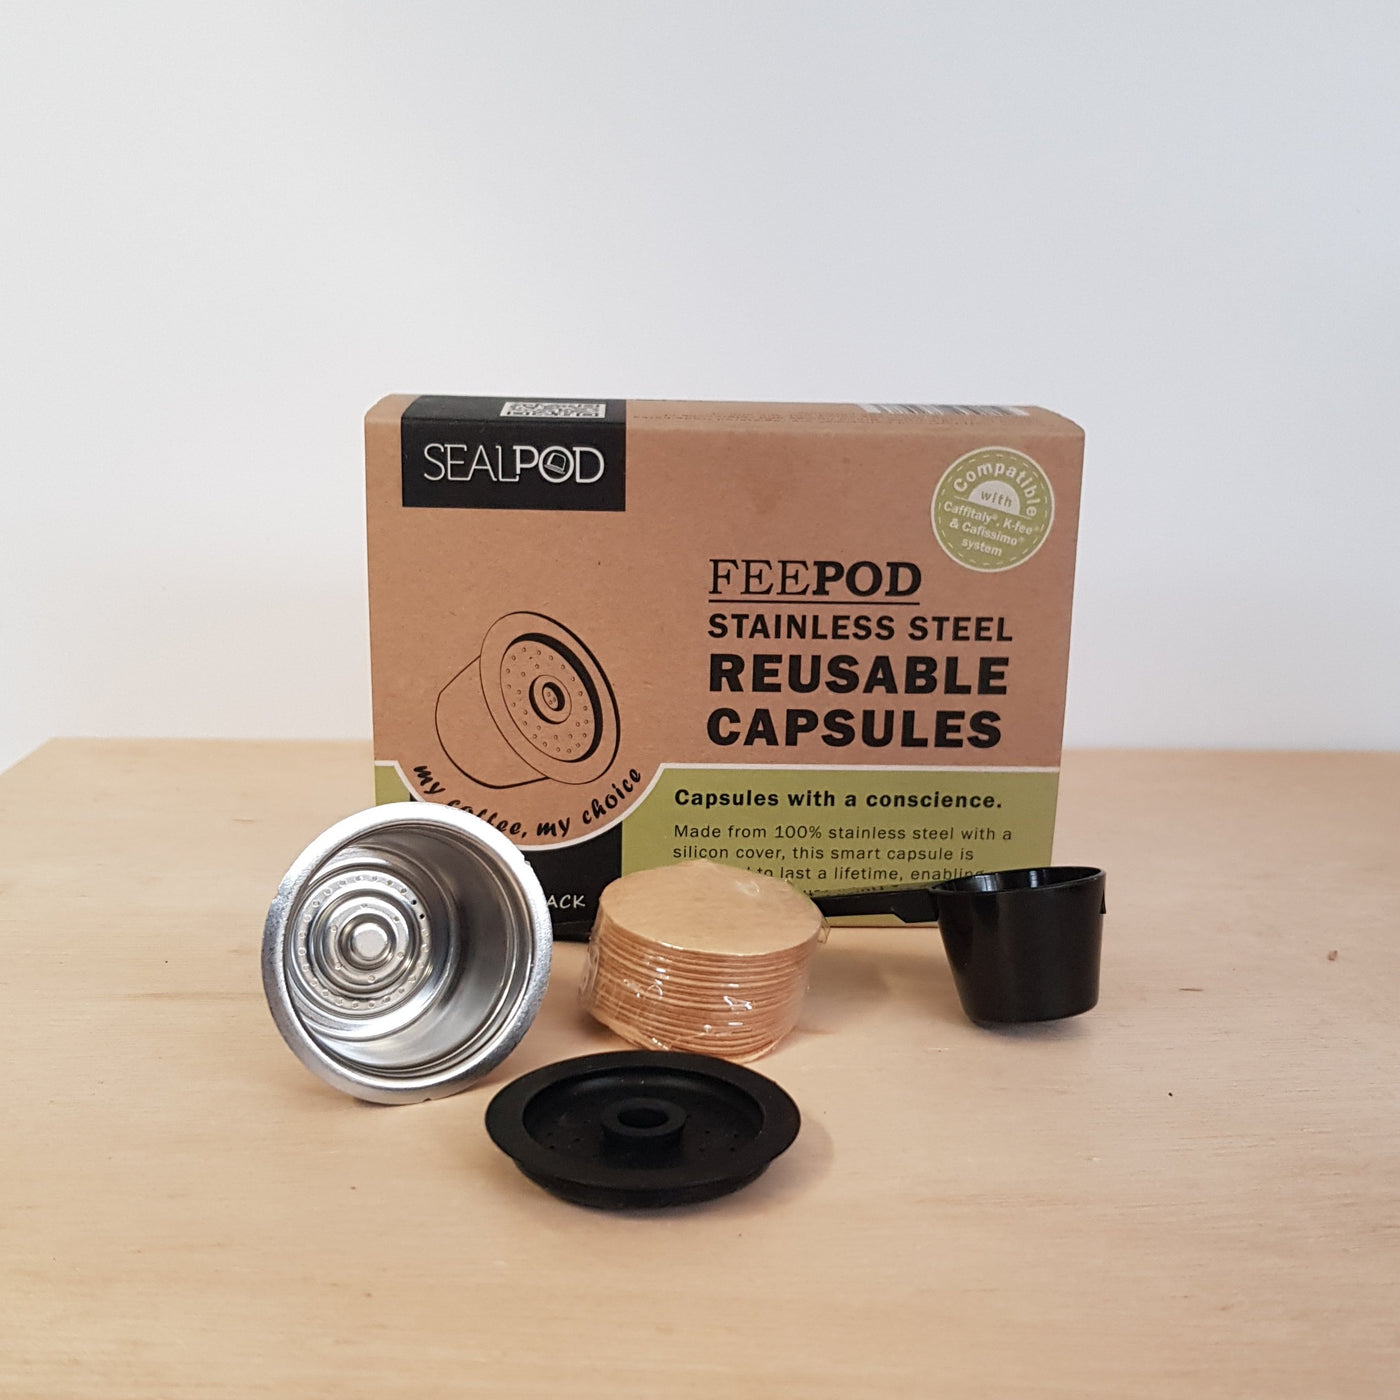 Feepod Reuseable Coffee Pod pack with 1 Stainless Steel Reusable Capsule 1 Silicone Cover 1 Scoop 100 Paper Filters (4156360491059)